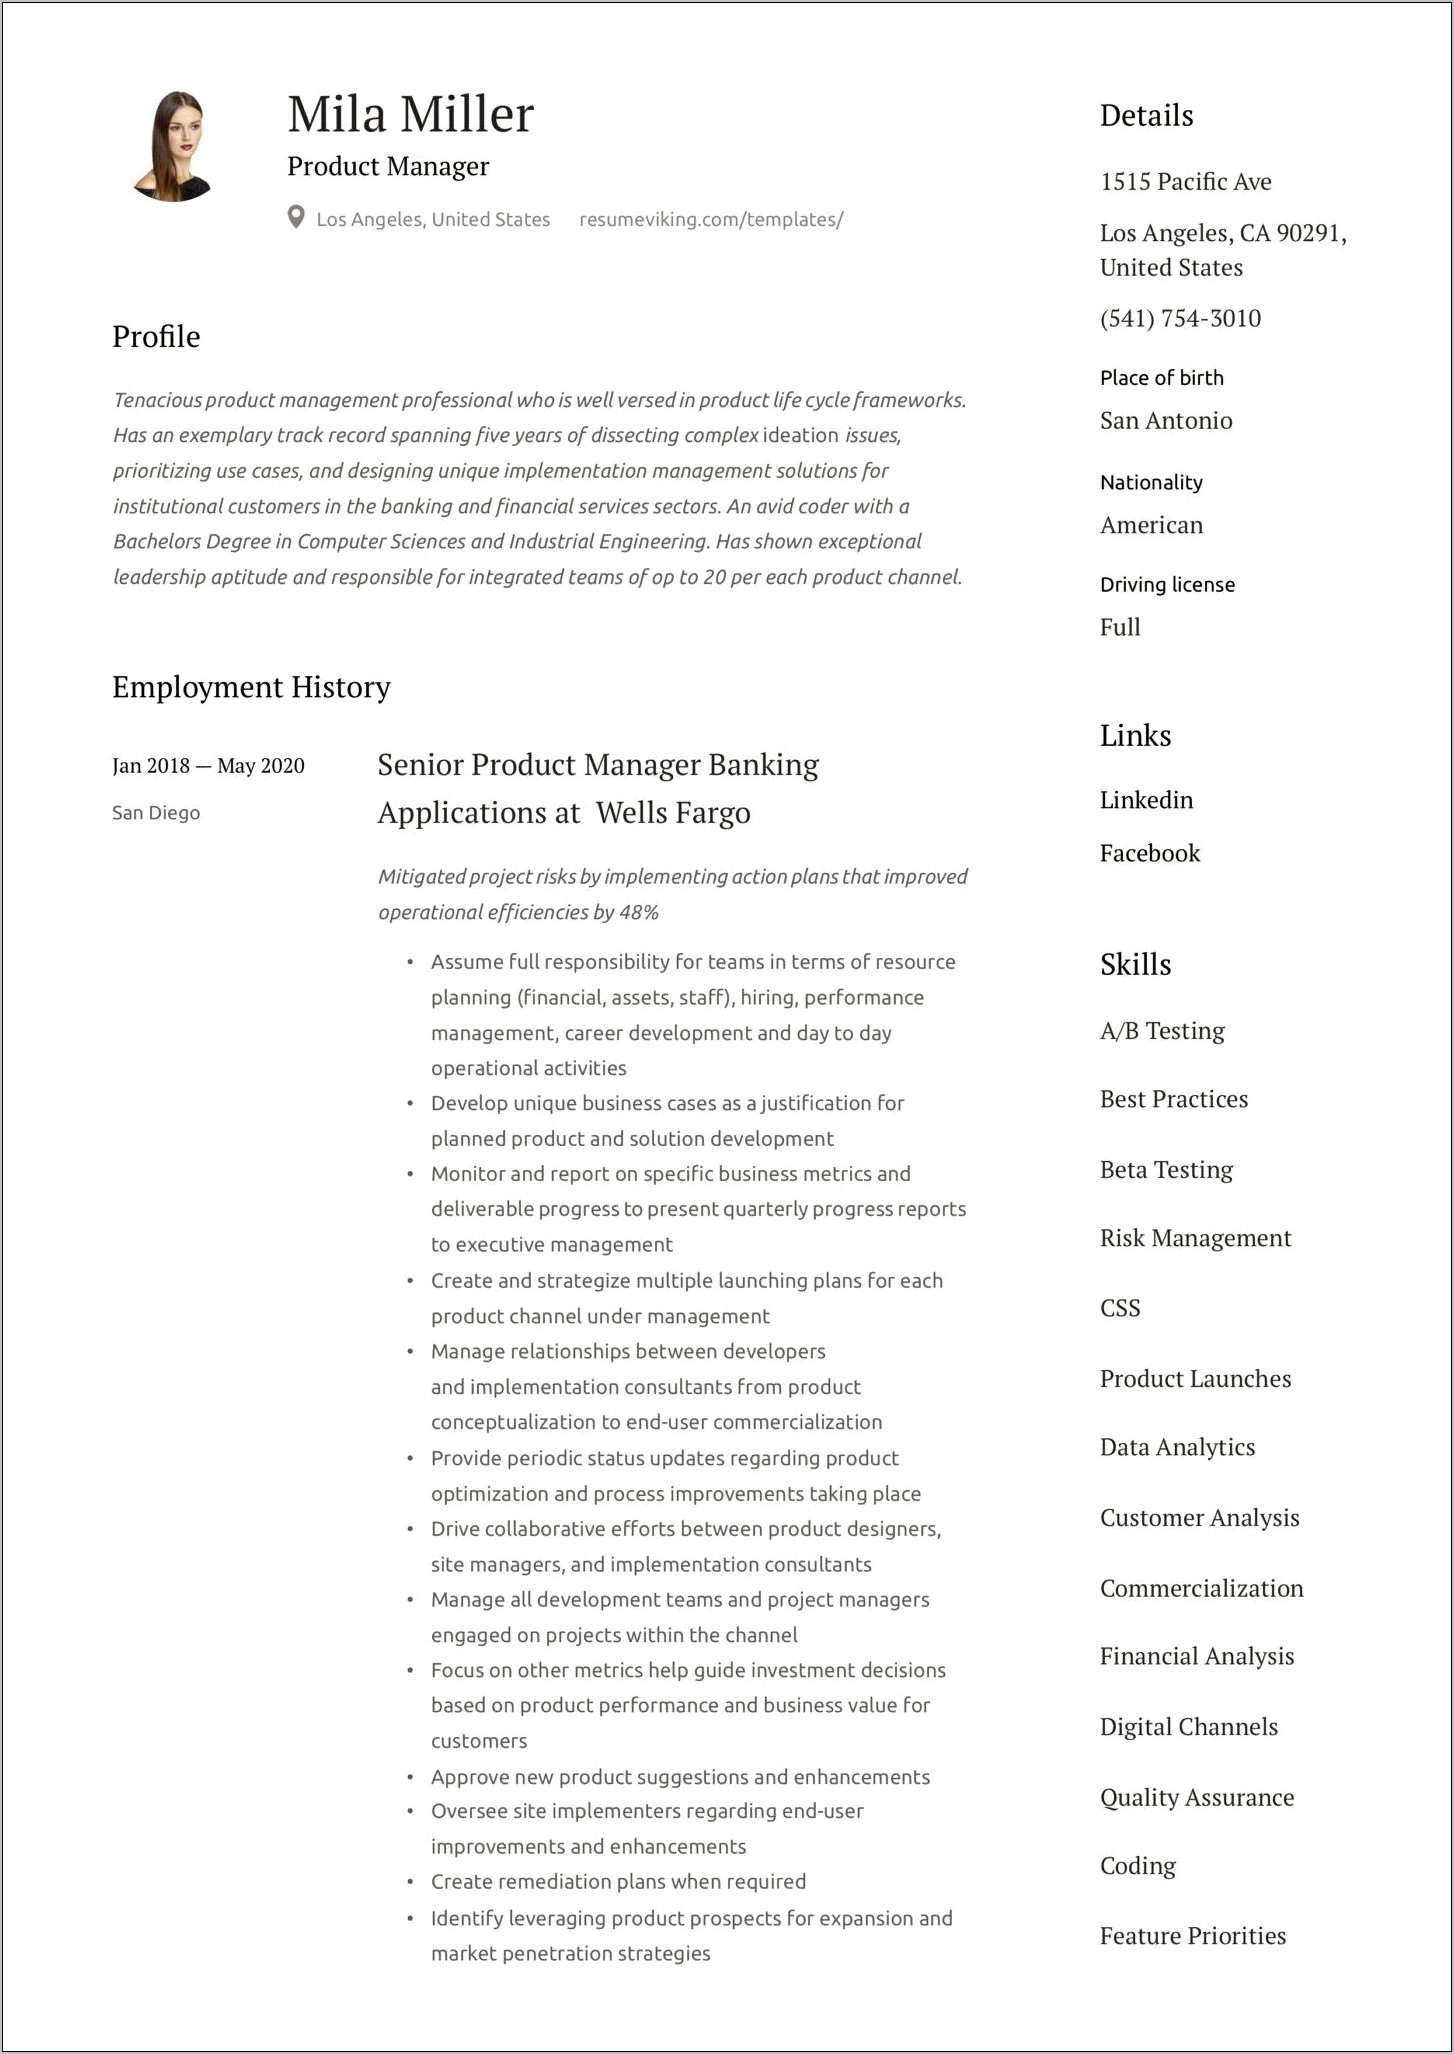 Senior Manager Effective Resume Examples